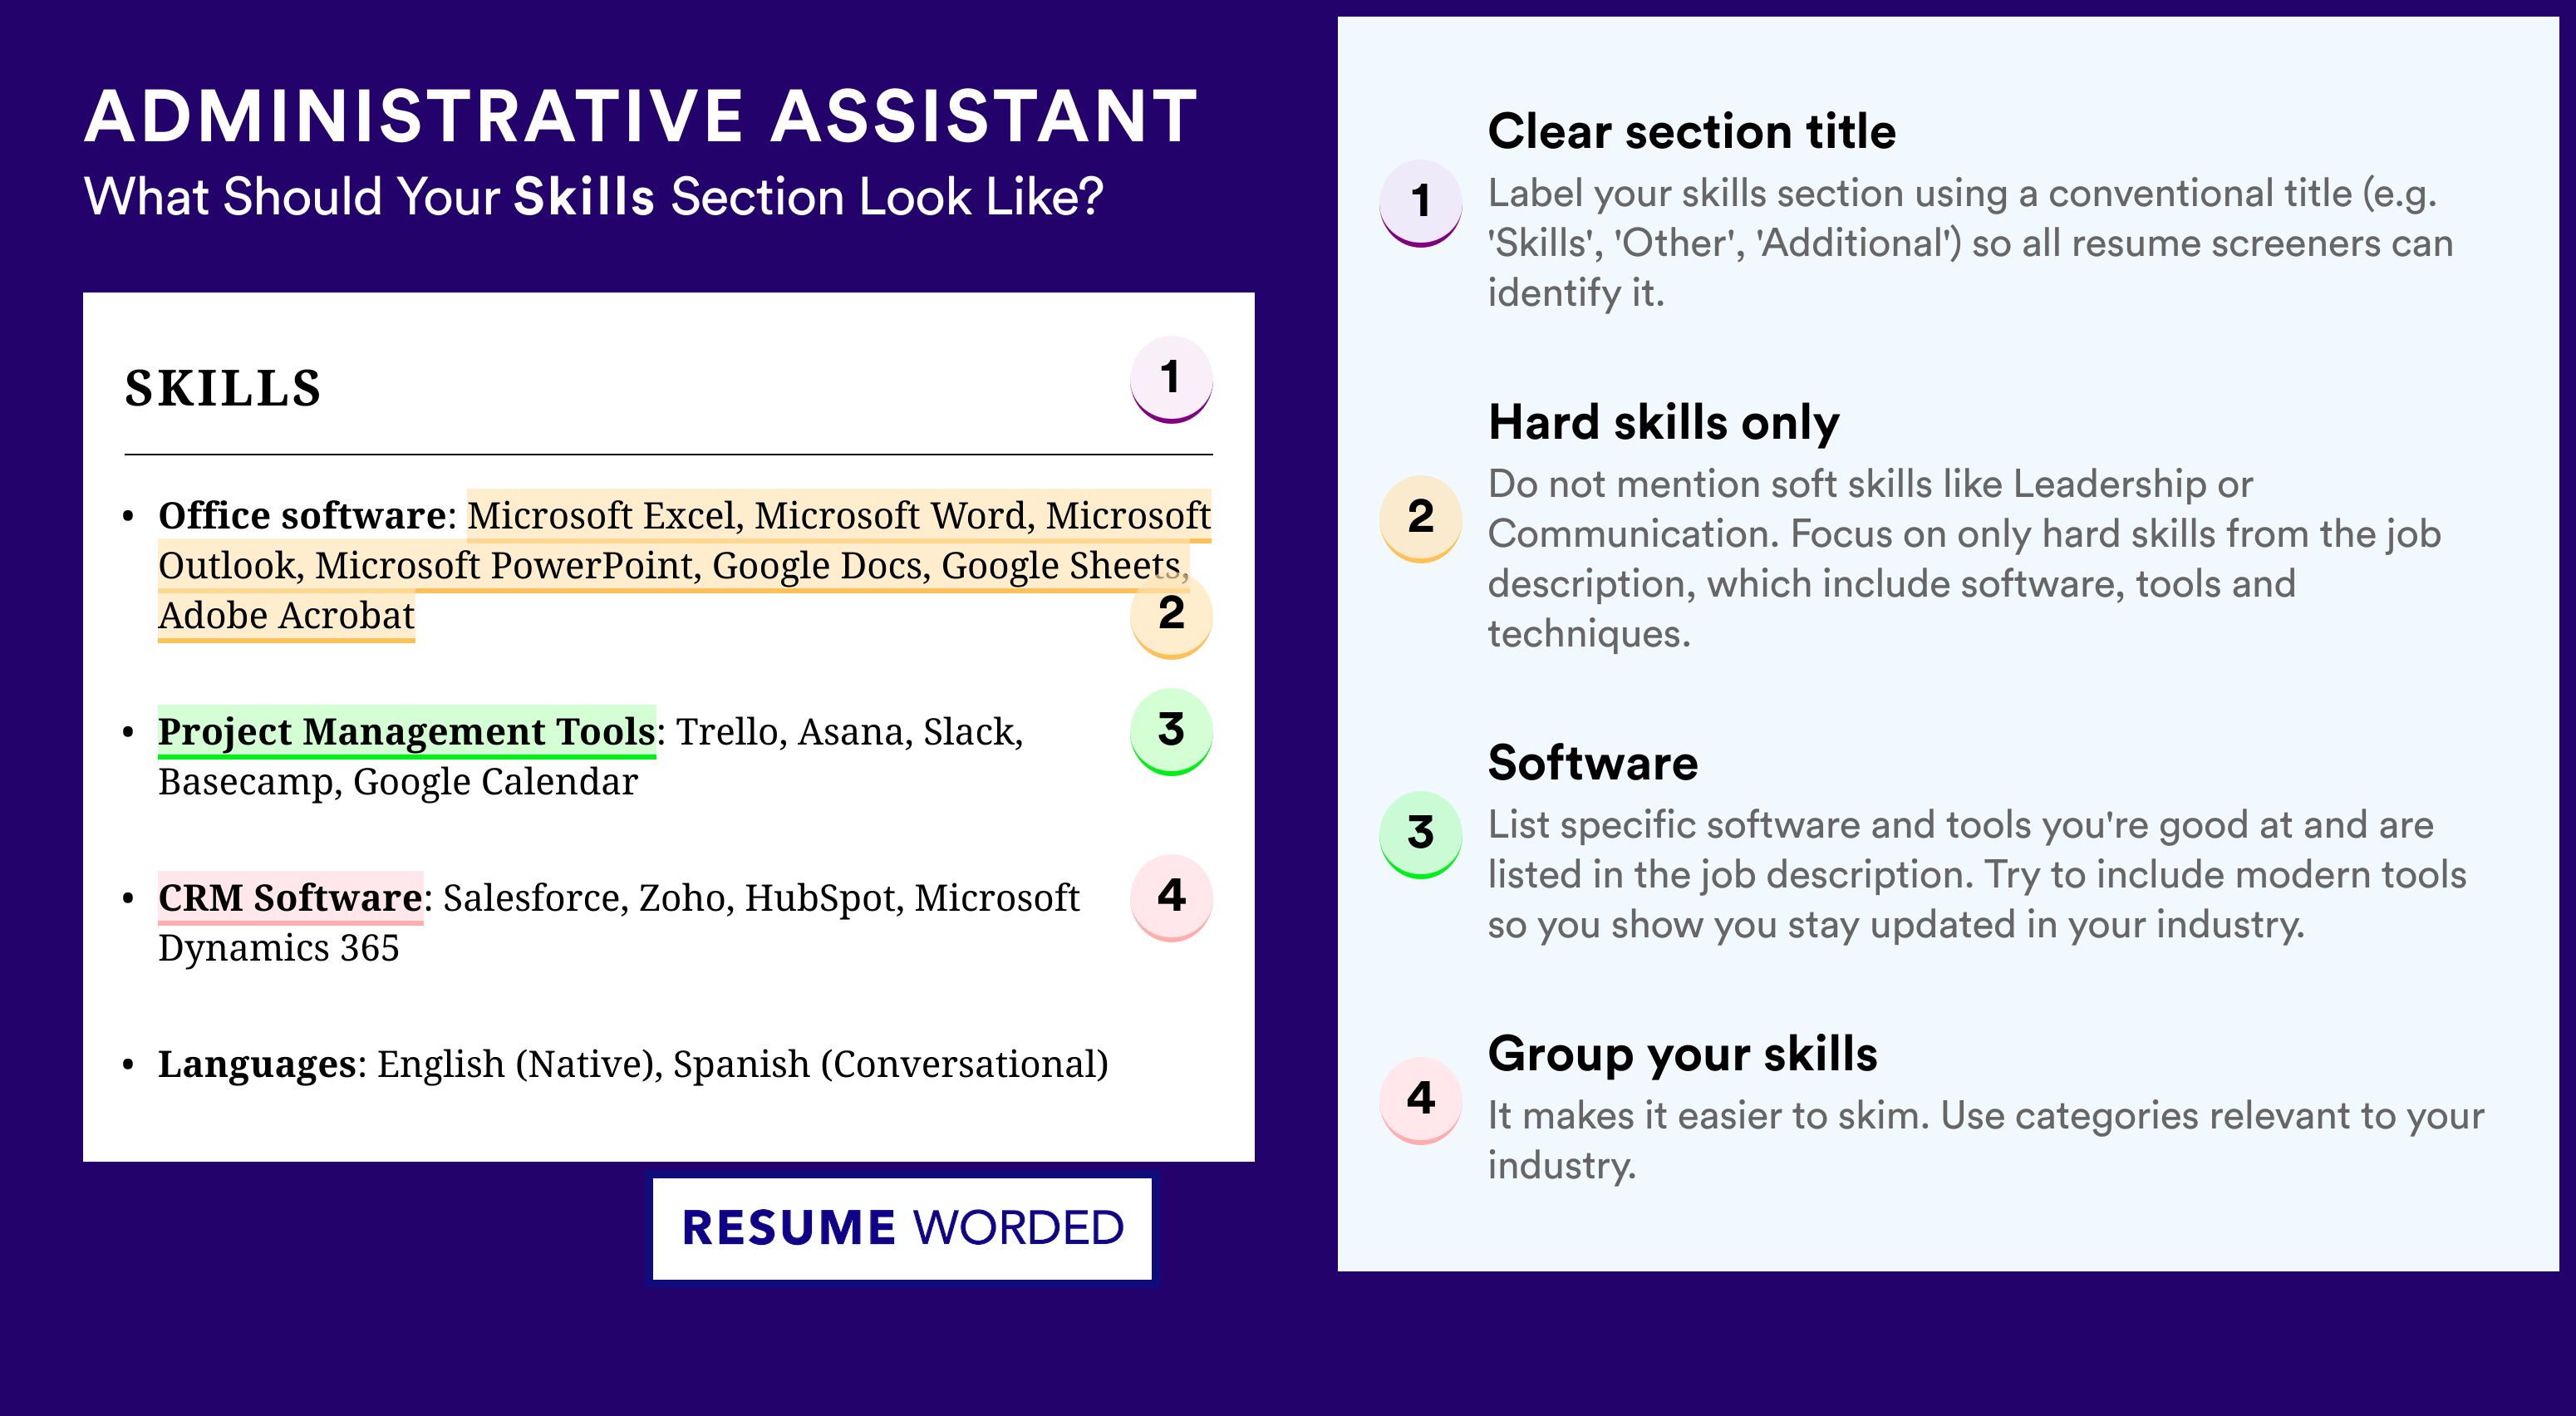 How To Write Your Skills Section - Administrative Assistant Roles